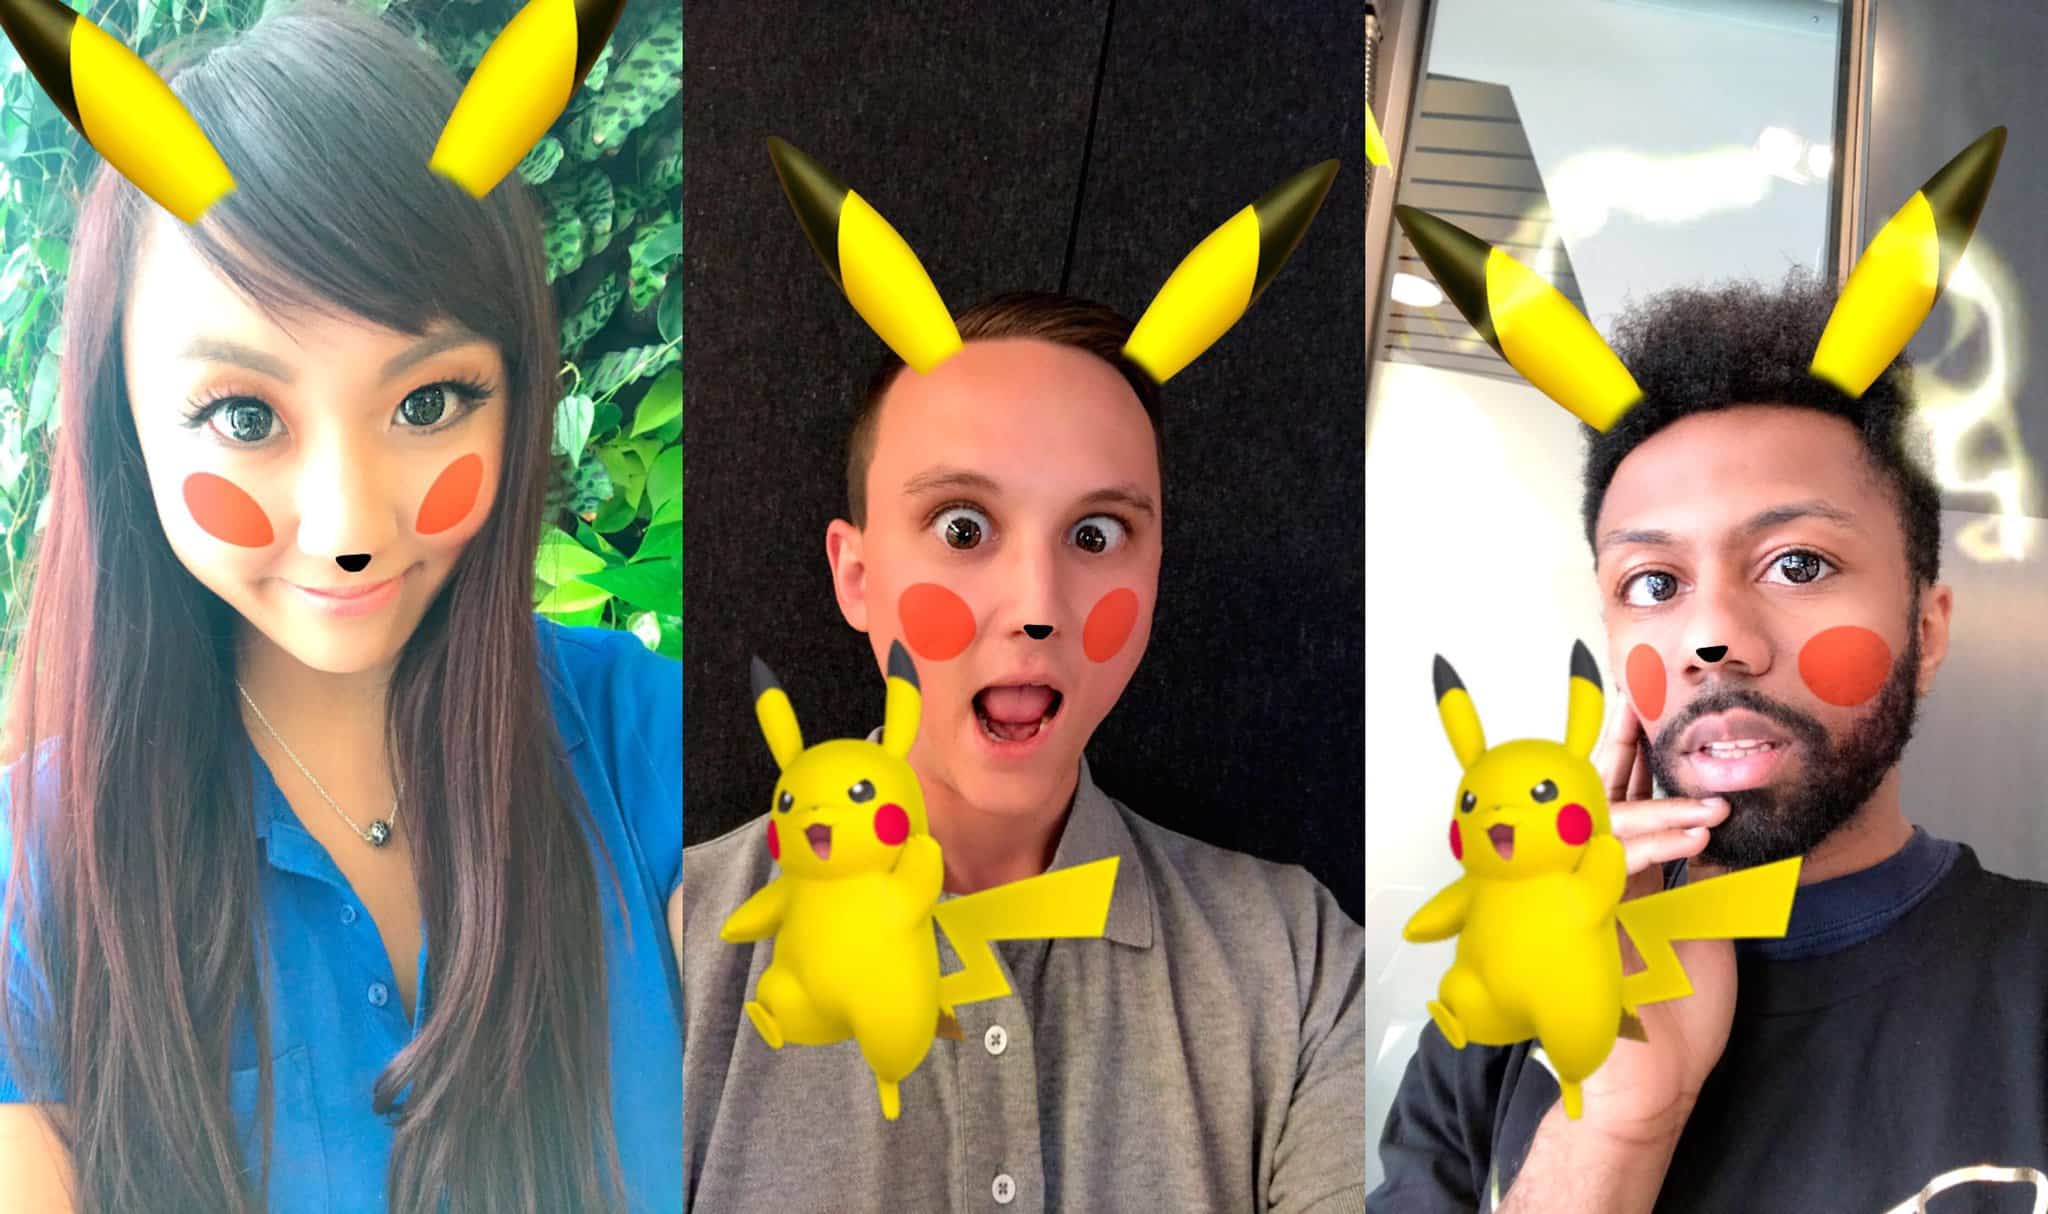 vervorming betreden Boos worden Pikachu Snapchat filter lets you turn yourself into a Pokémon | Cult of Mac